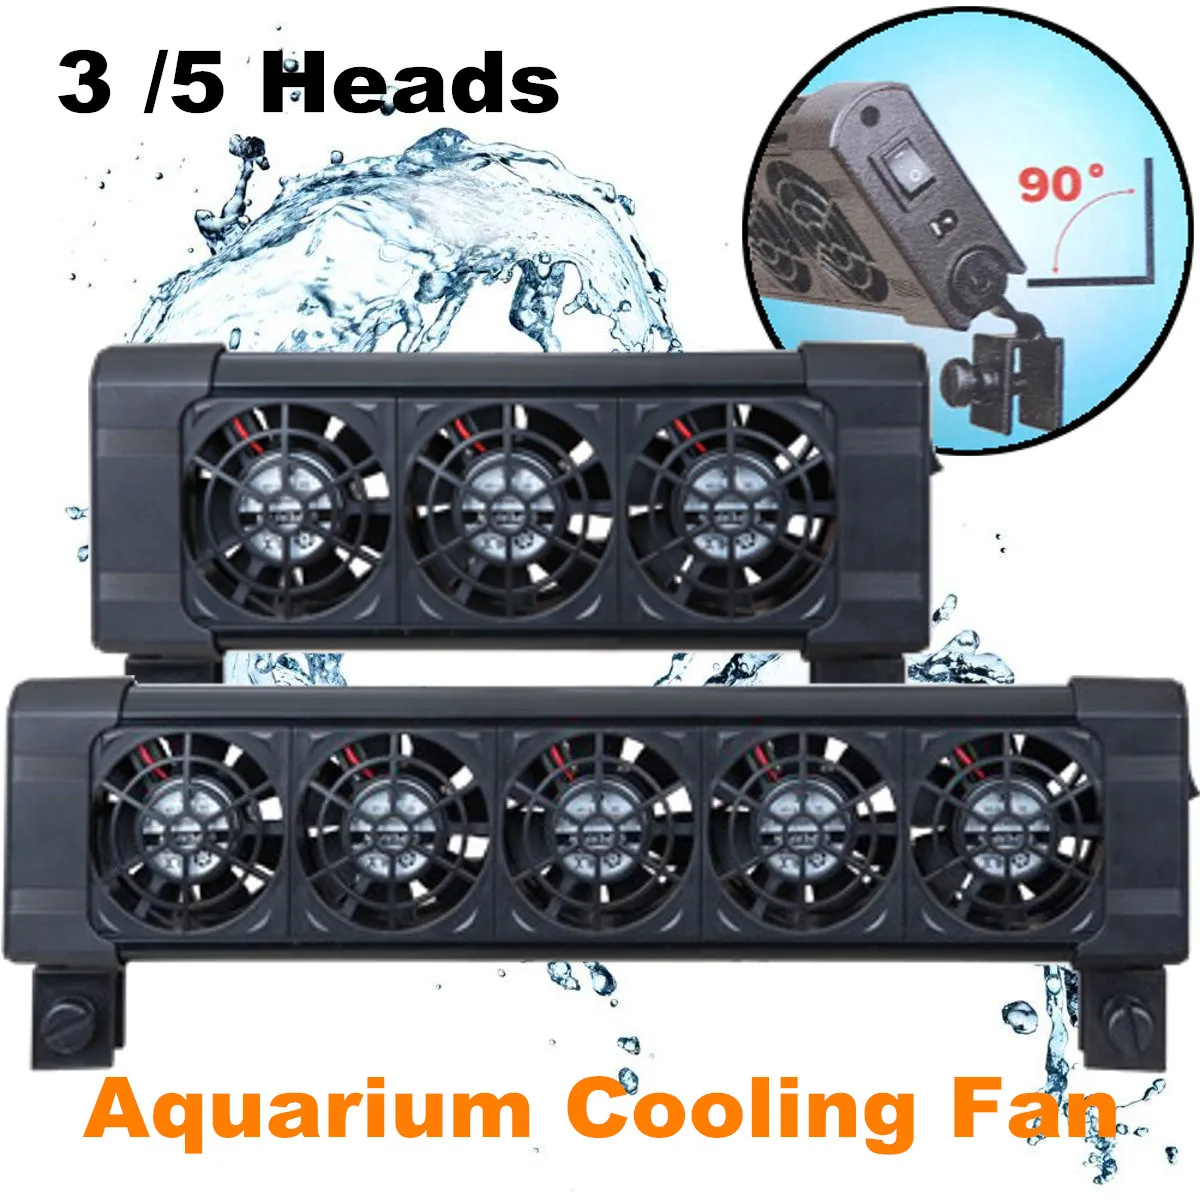 

3/5 Heads Low Power Consumption Chillers Cooling Fan Fish Tank Marine Ponds Temperature Controller 110-240V 360 Rotating Mounter